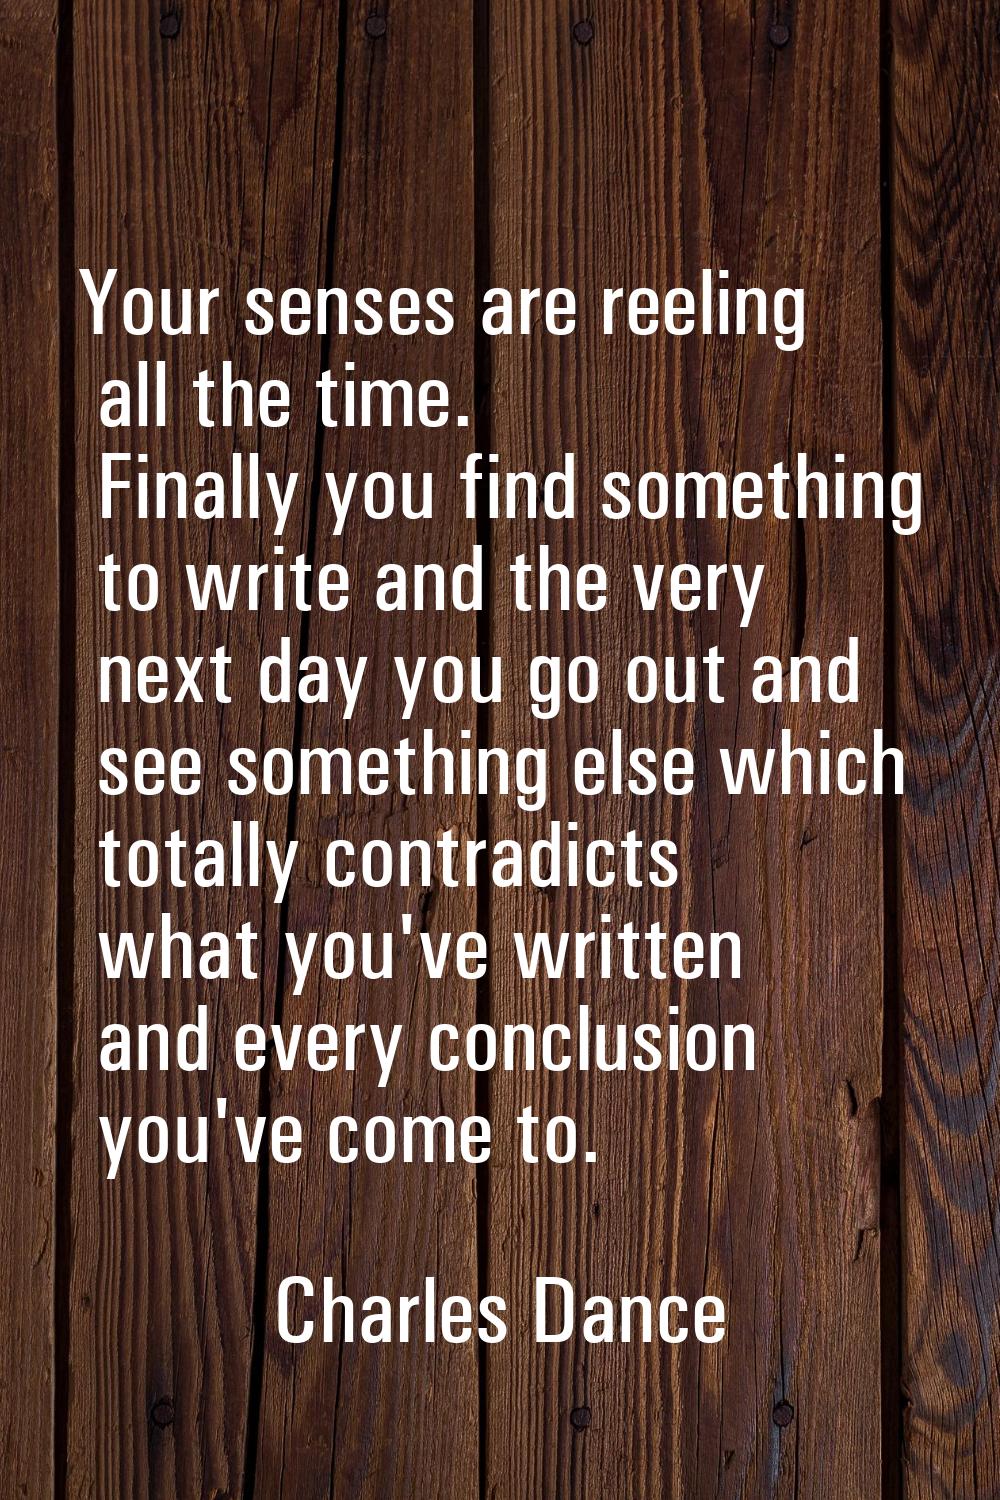 Your senses are reeling all the time. Finally you find something to write and the very next day you